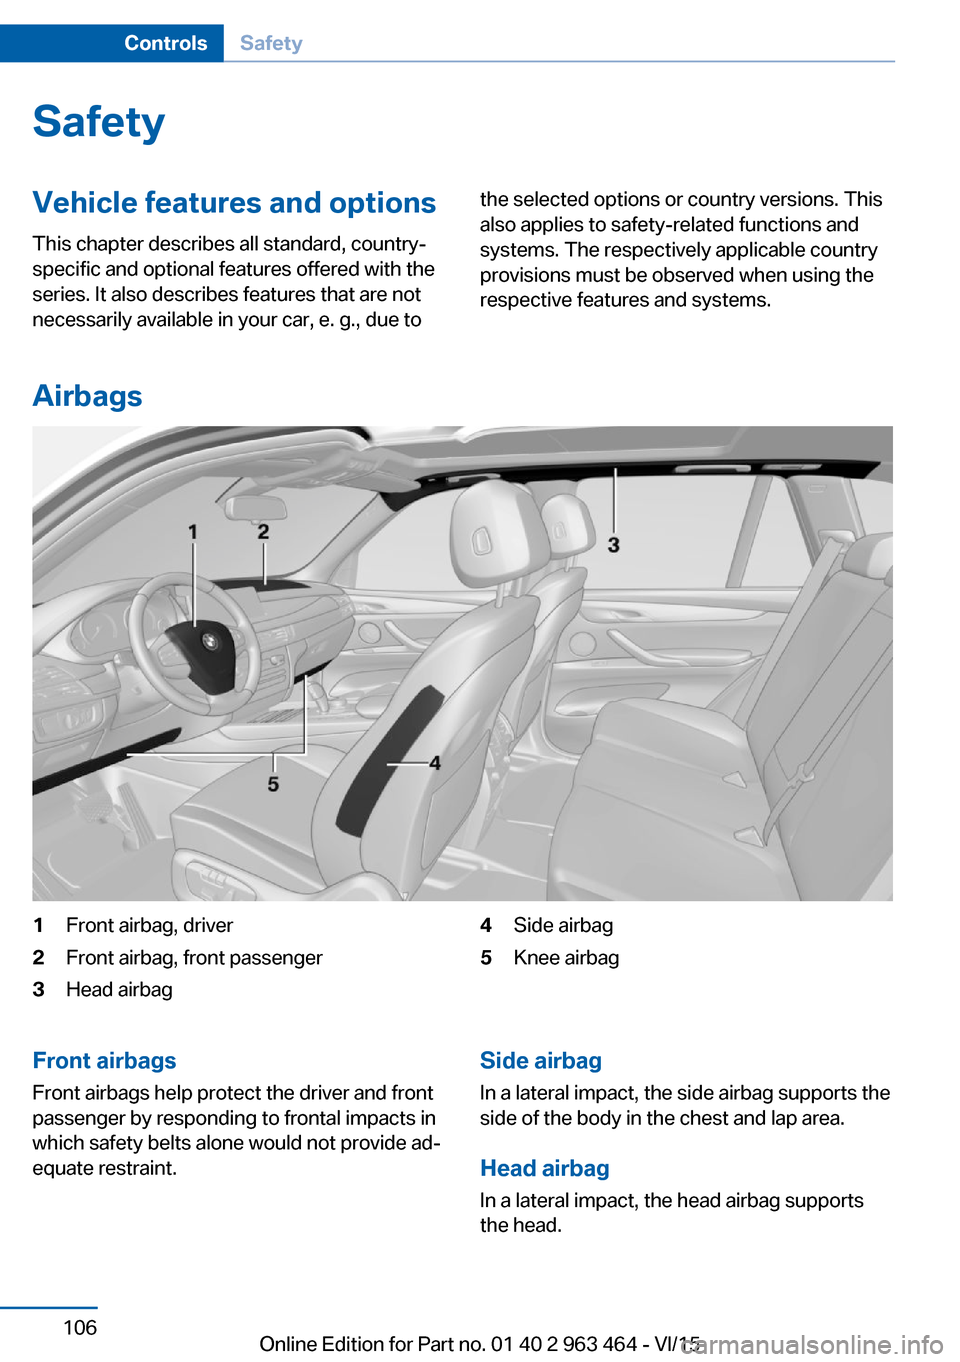 BMW X6 2016 F16 Owners Guide SafetyVehicle features and options
This chapter describes all standard, country-
specific and optional features offered with the
series. It also describes features that are not
necessarily available i